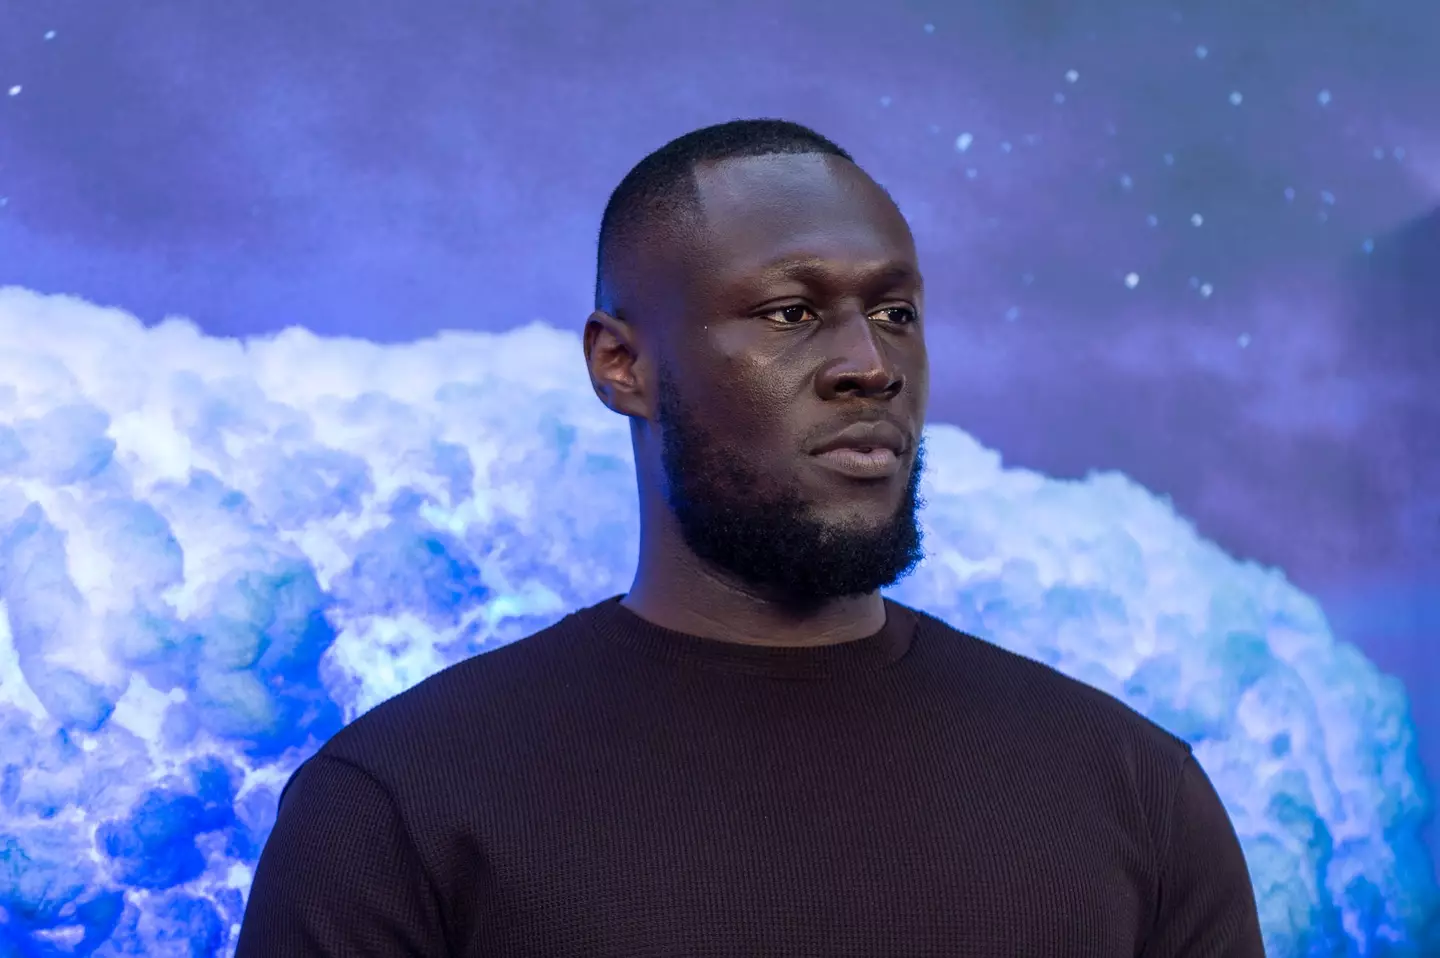 Stormzy's third album 'This is What I Mean' is out now.